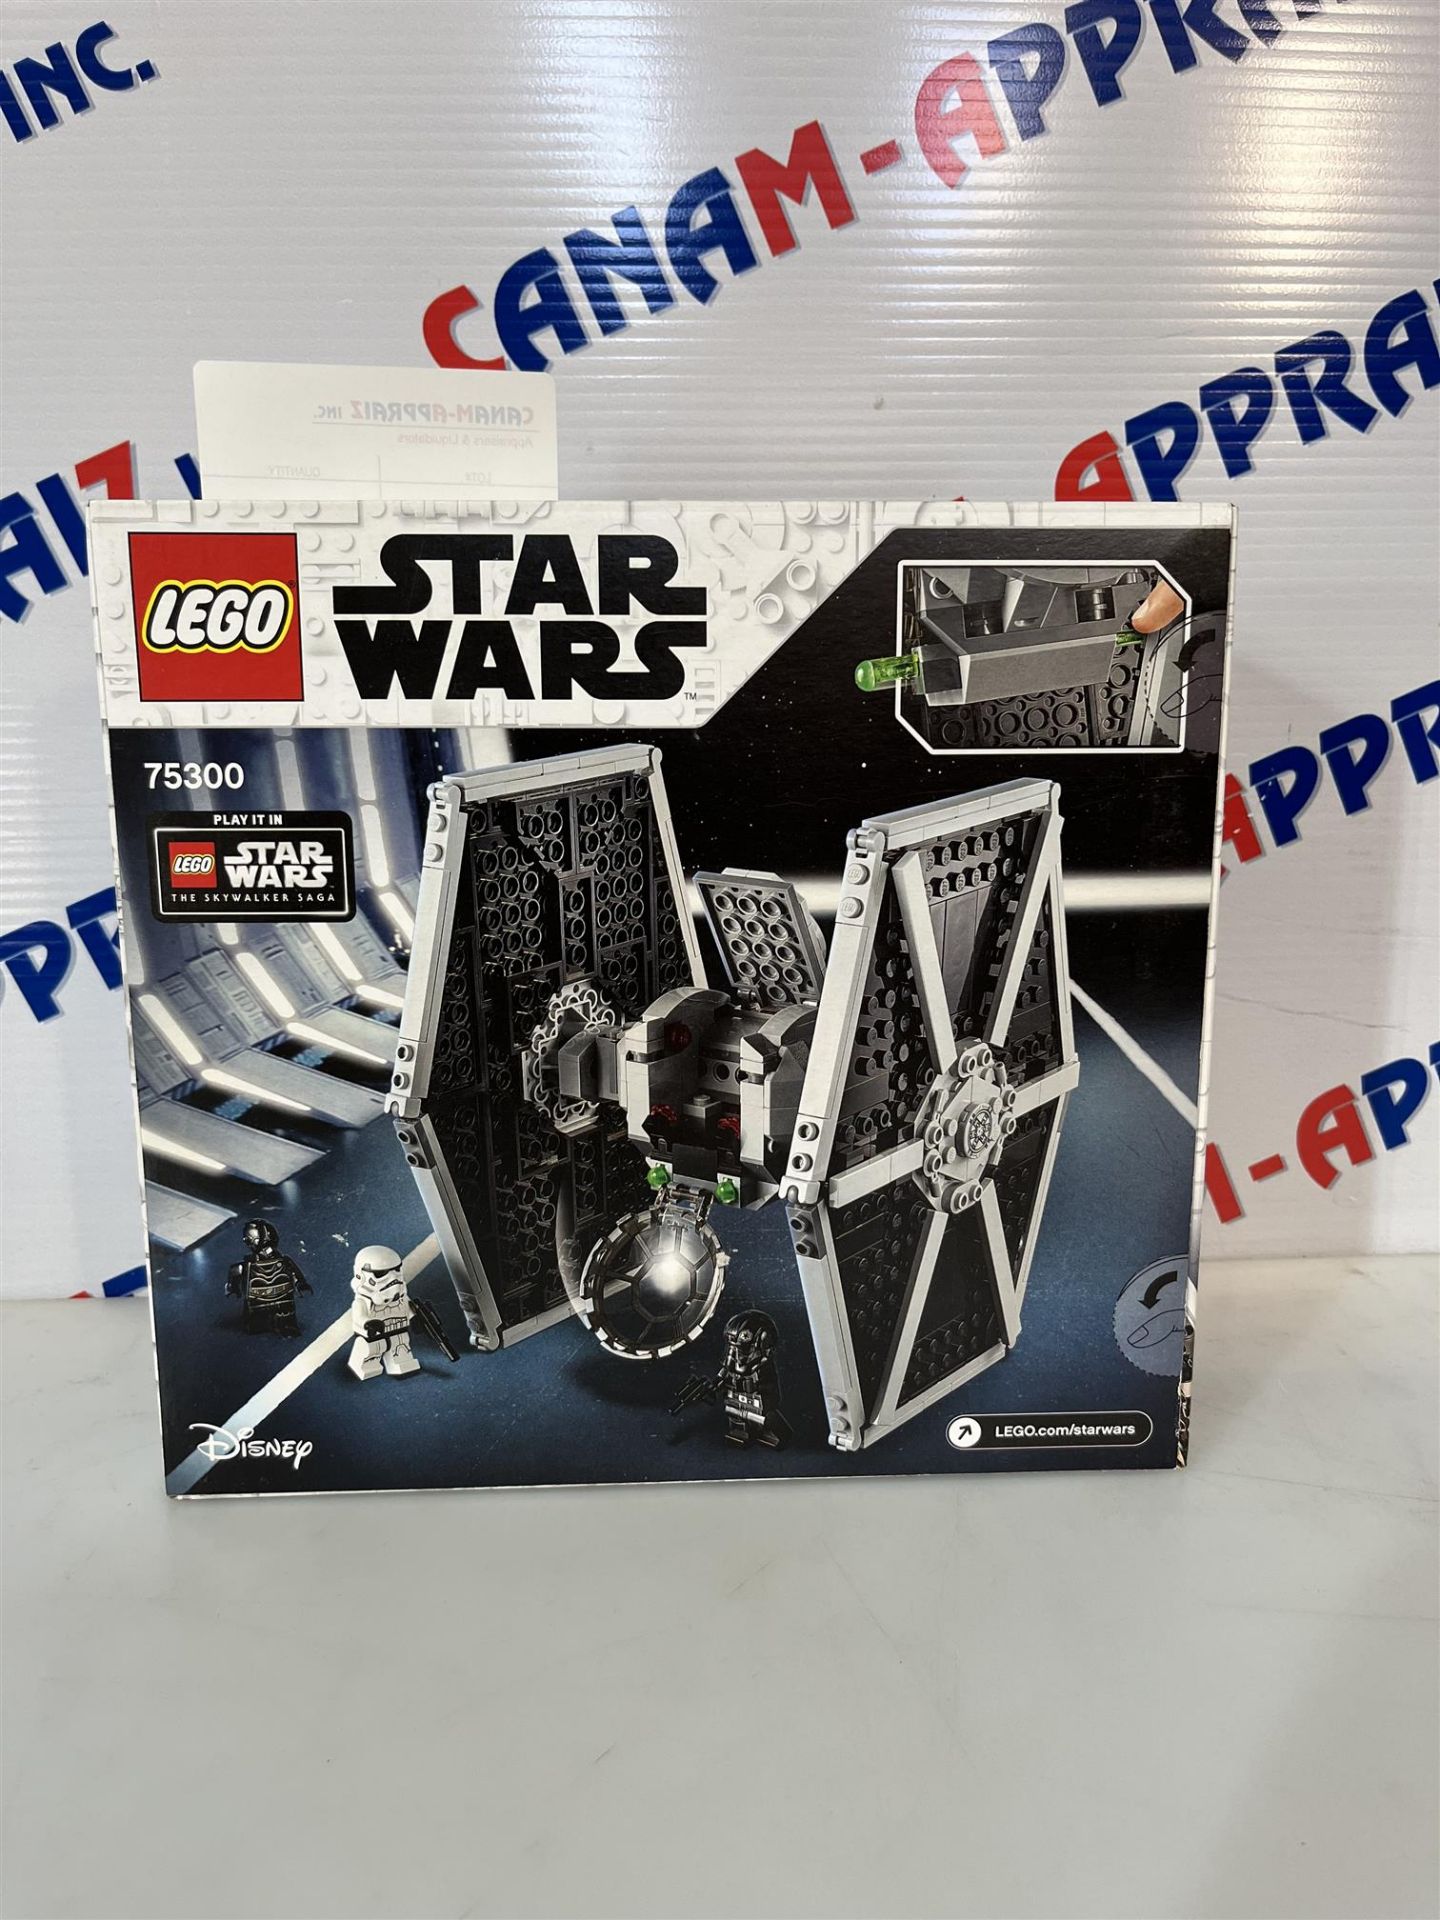 Lego Star Wars Imperial TIE Fighter 75300 - Ages 8+ - 432 PCS - Image 2 of 2